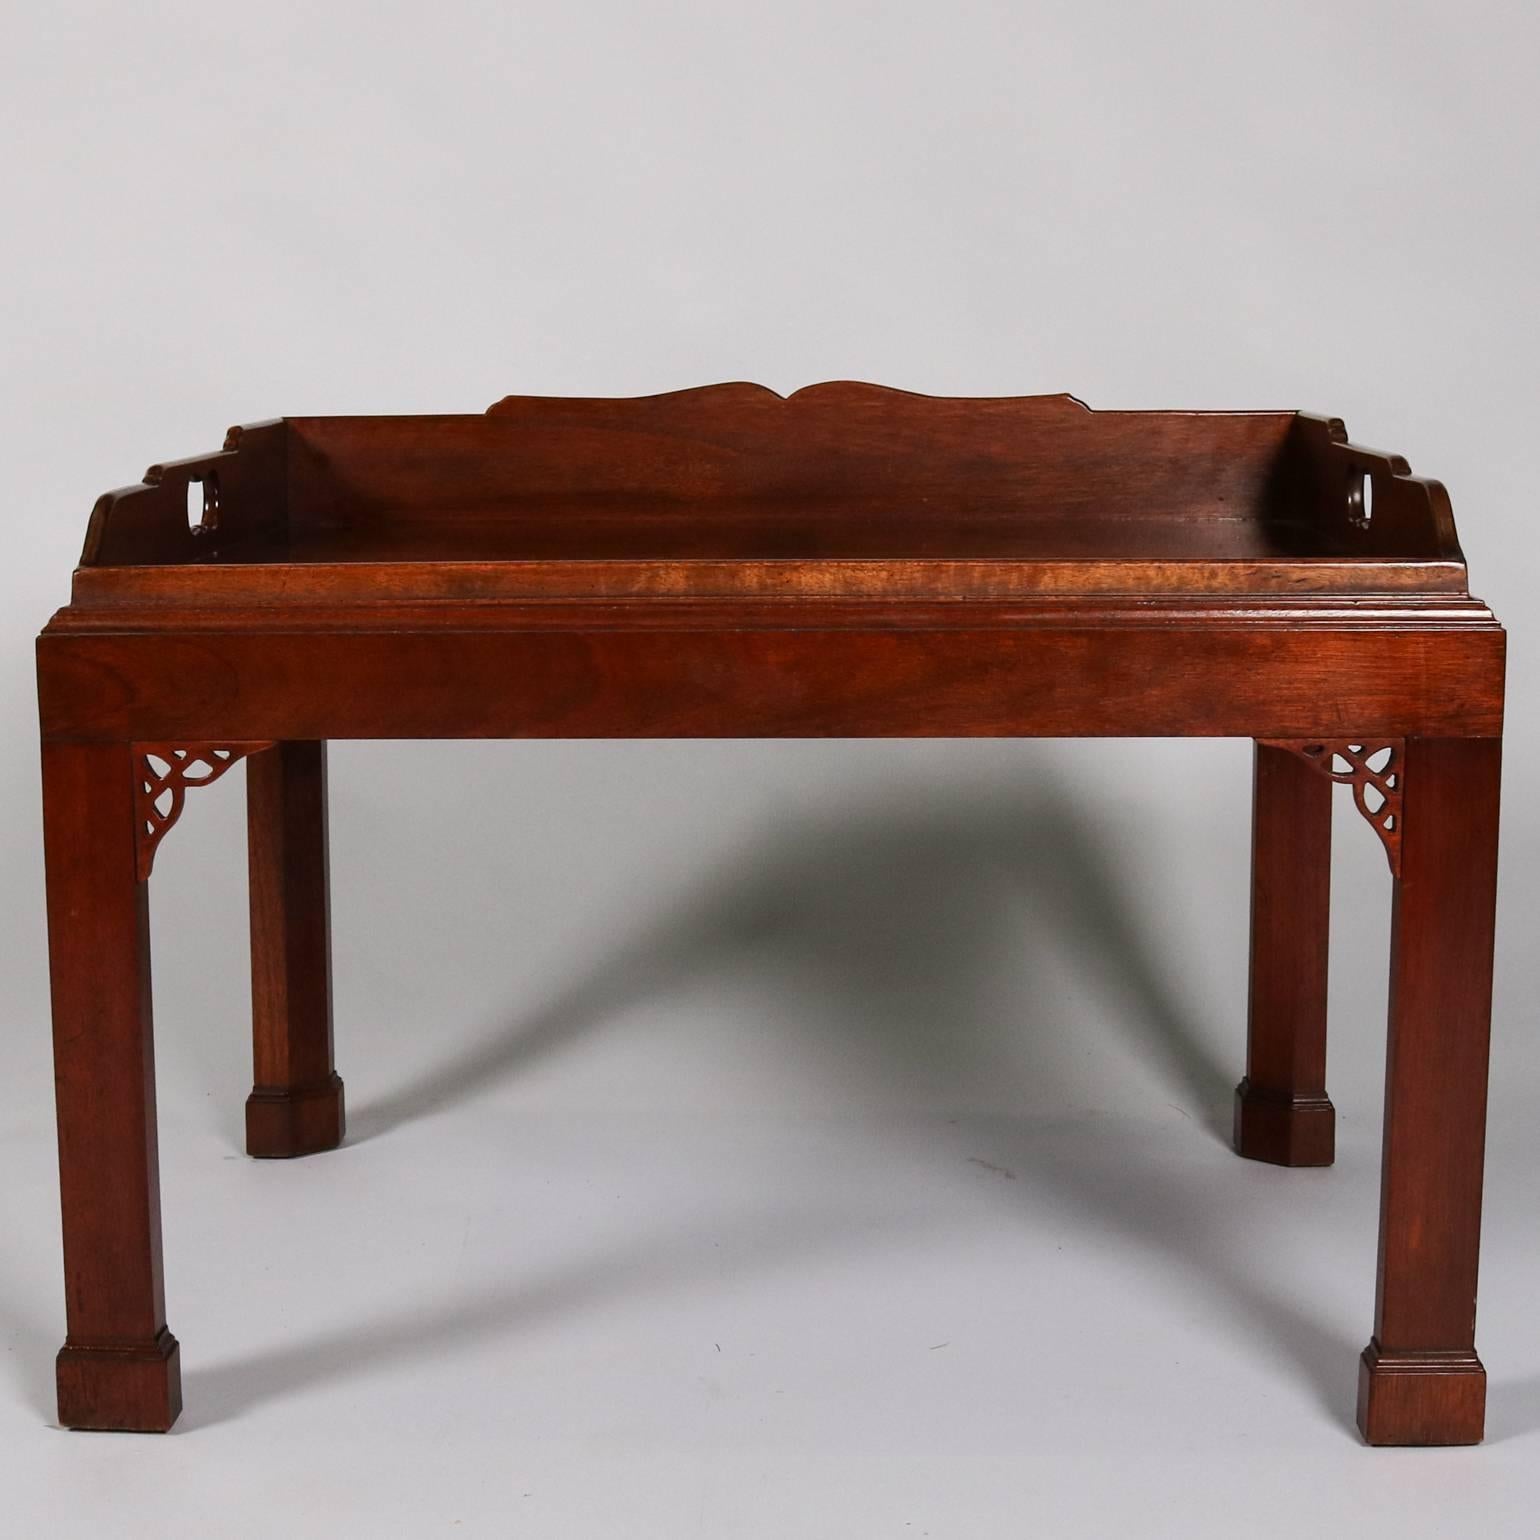 Antique carved mahogany tray top table by Baker features Chinese Chippendale form with pierced foliate corner and removable tray, 20th century.

Measures: 19